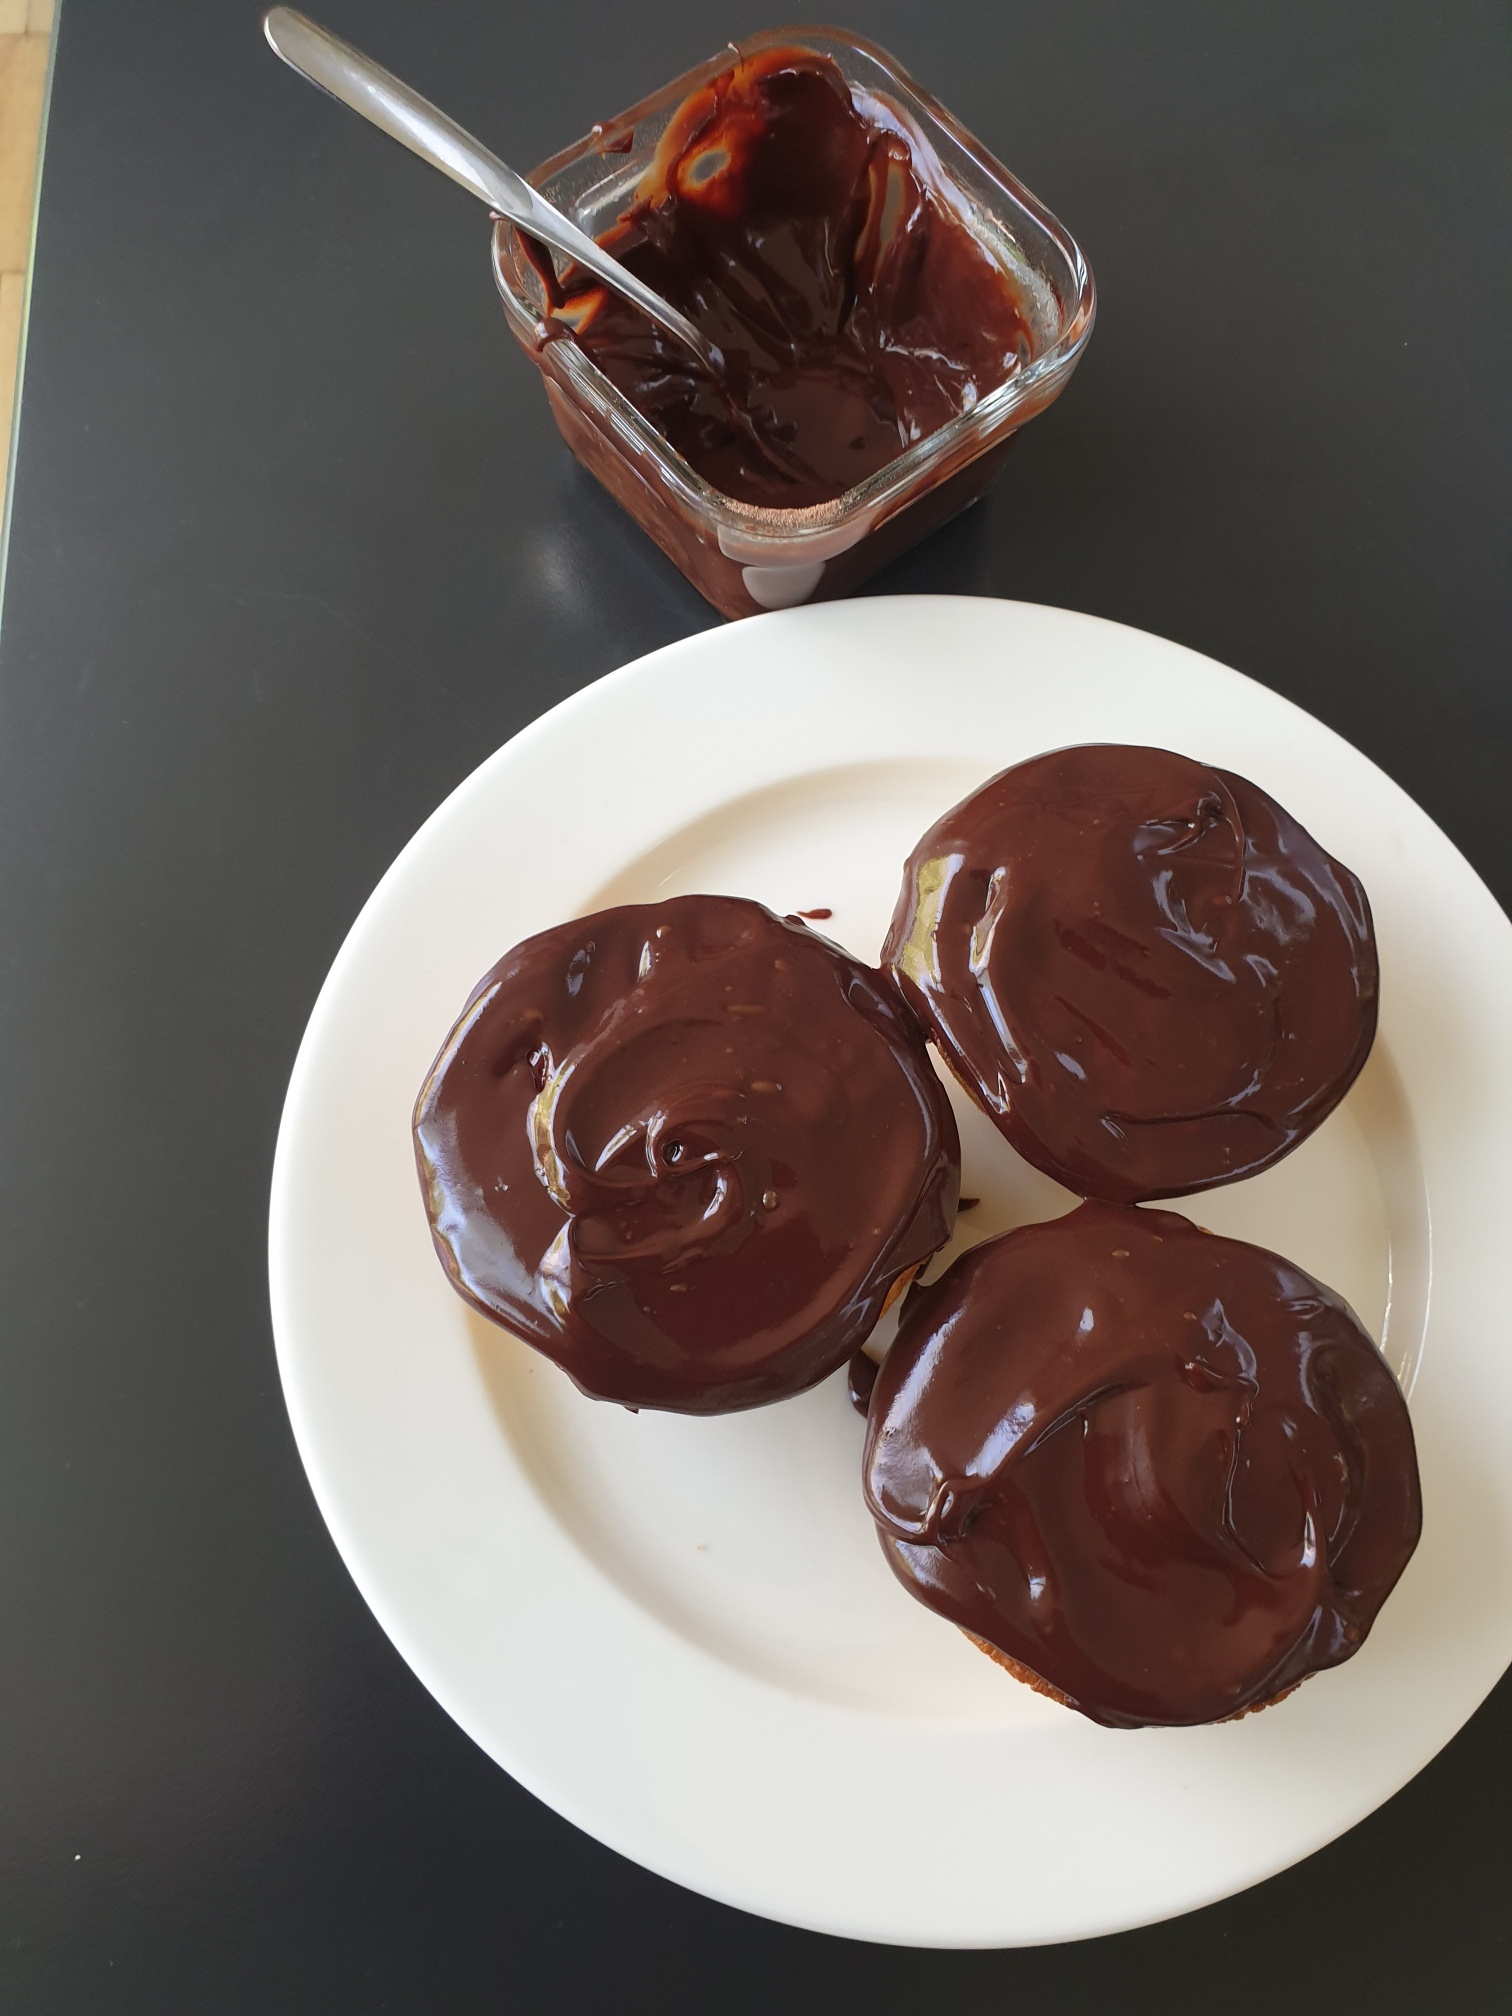 Sponge Cakes topped with chocolate ganache